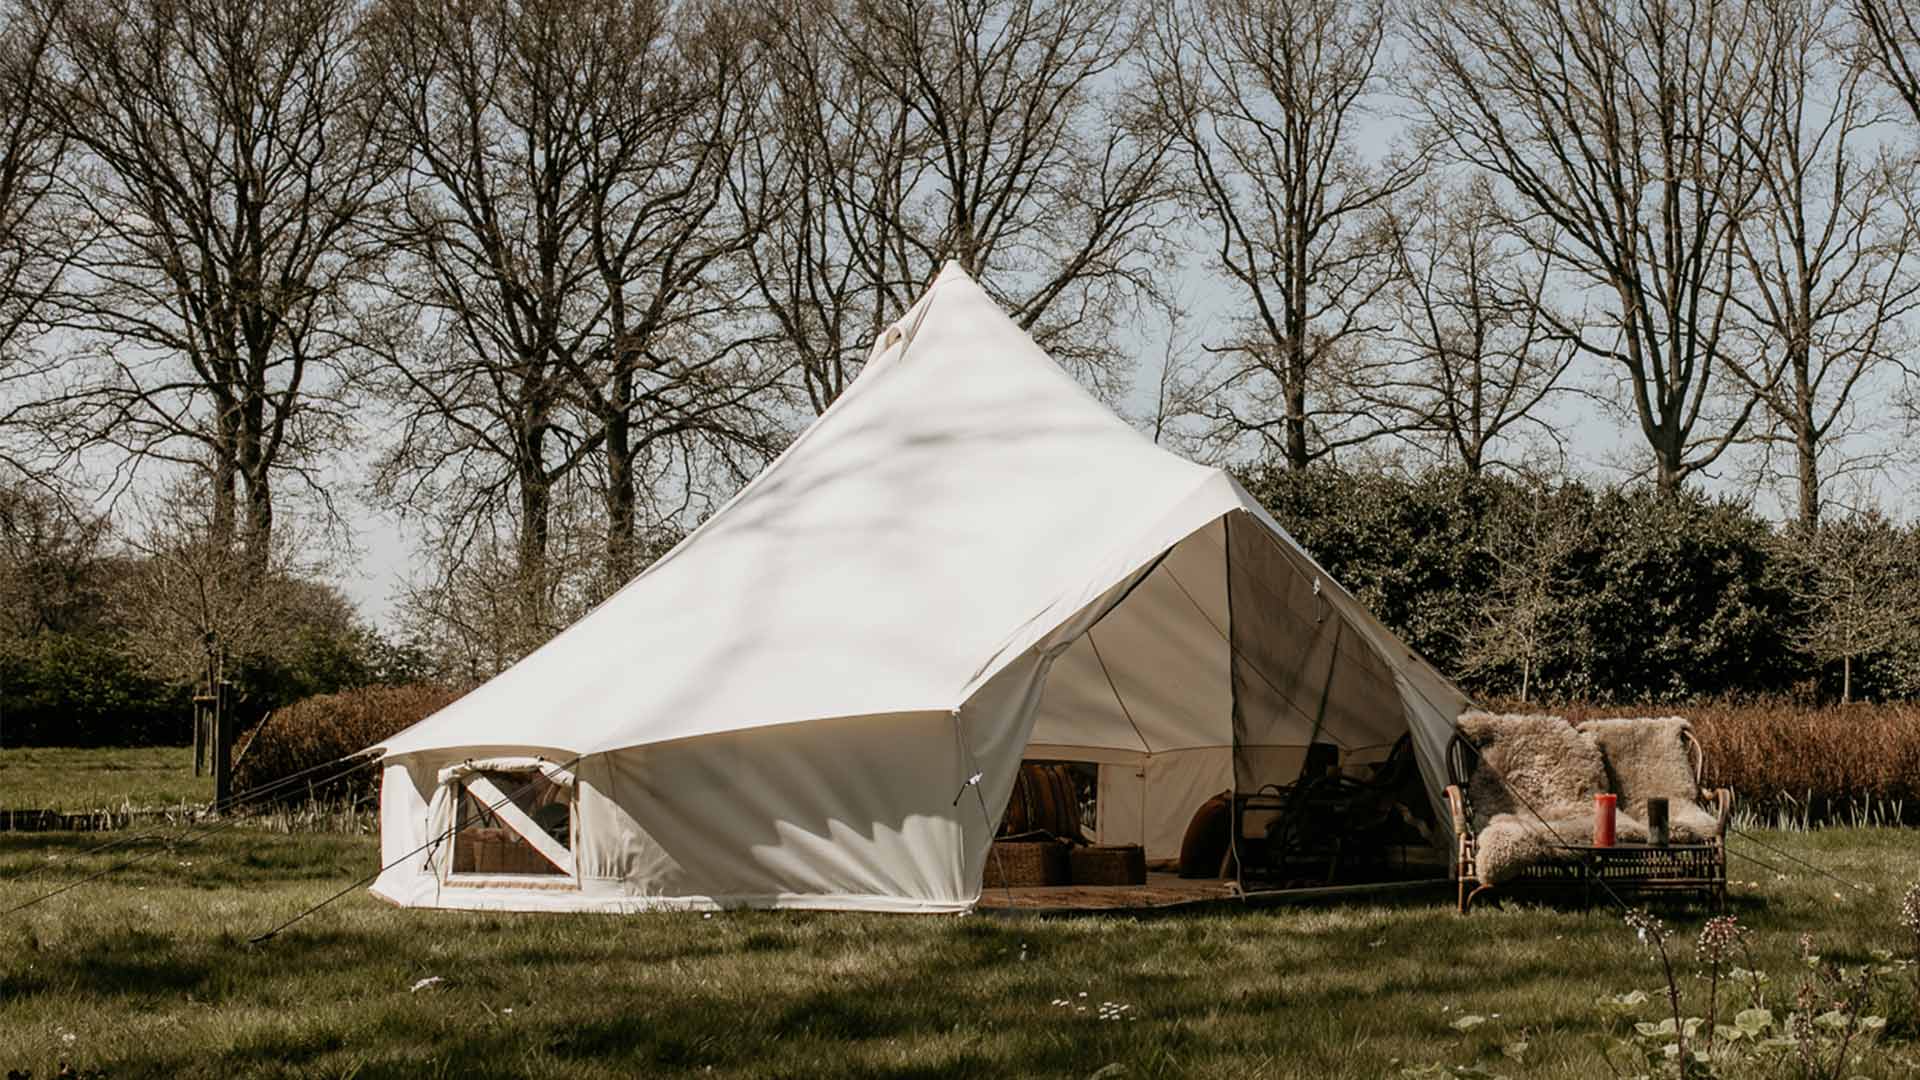 Why is the best tent a breathable one and where can I get one?